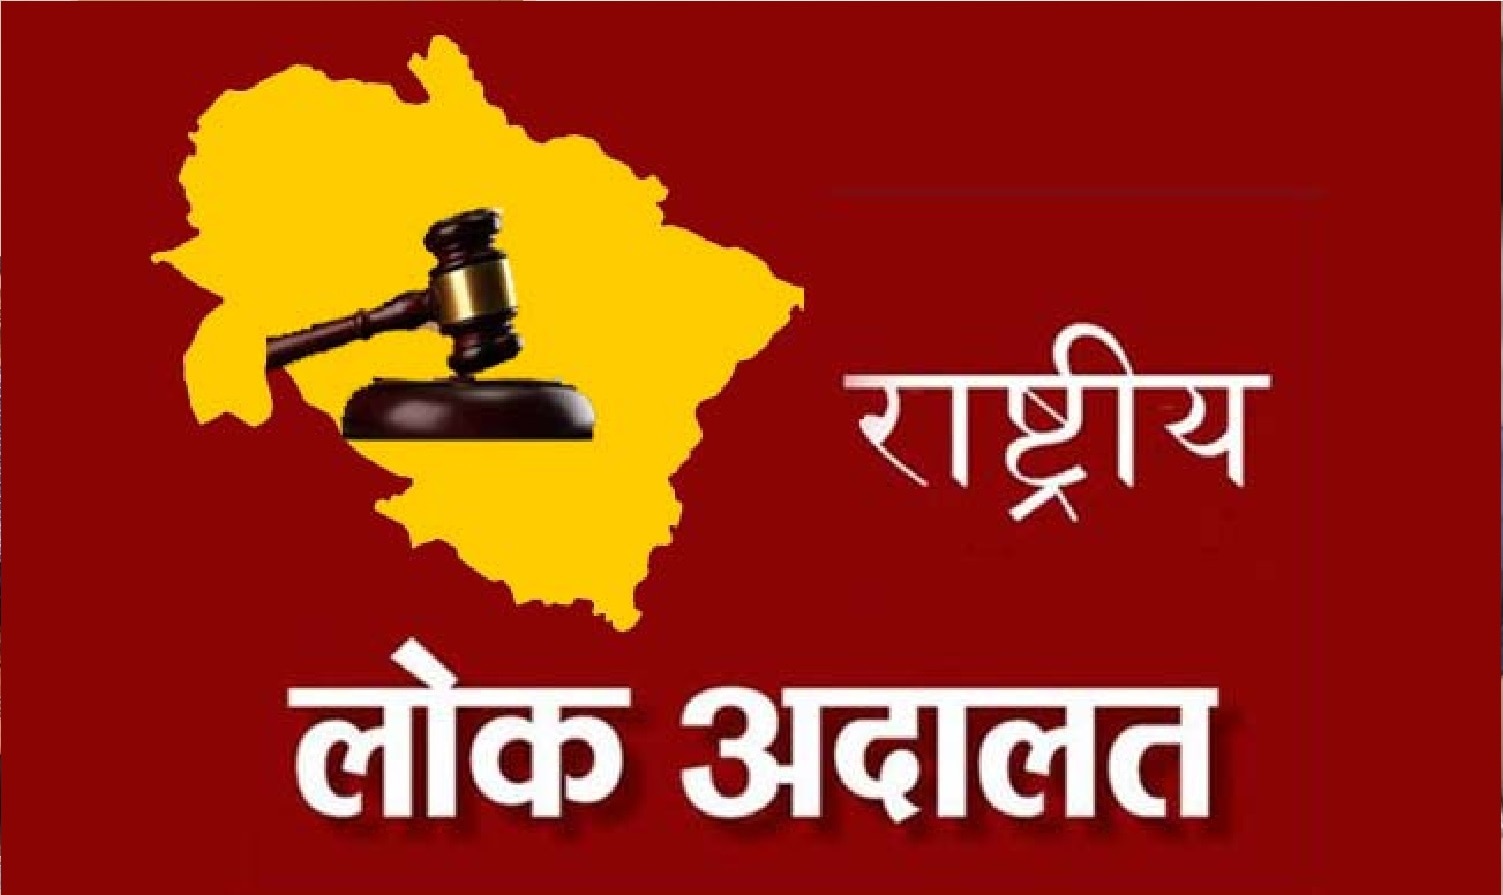 National Lok Adalat will be held on this date next month these issues